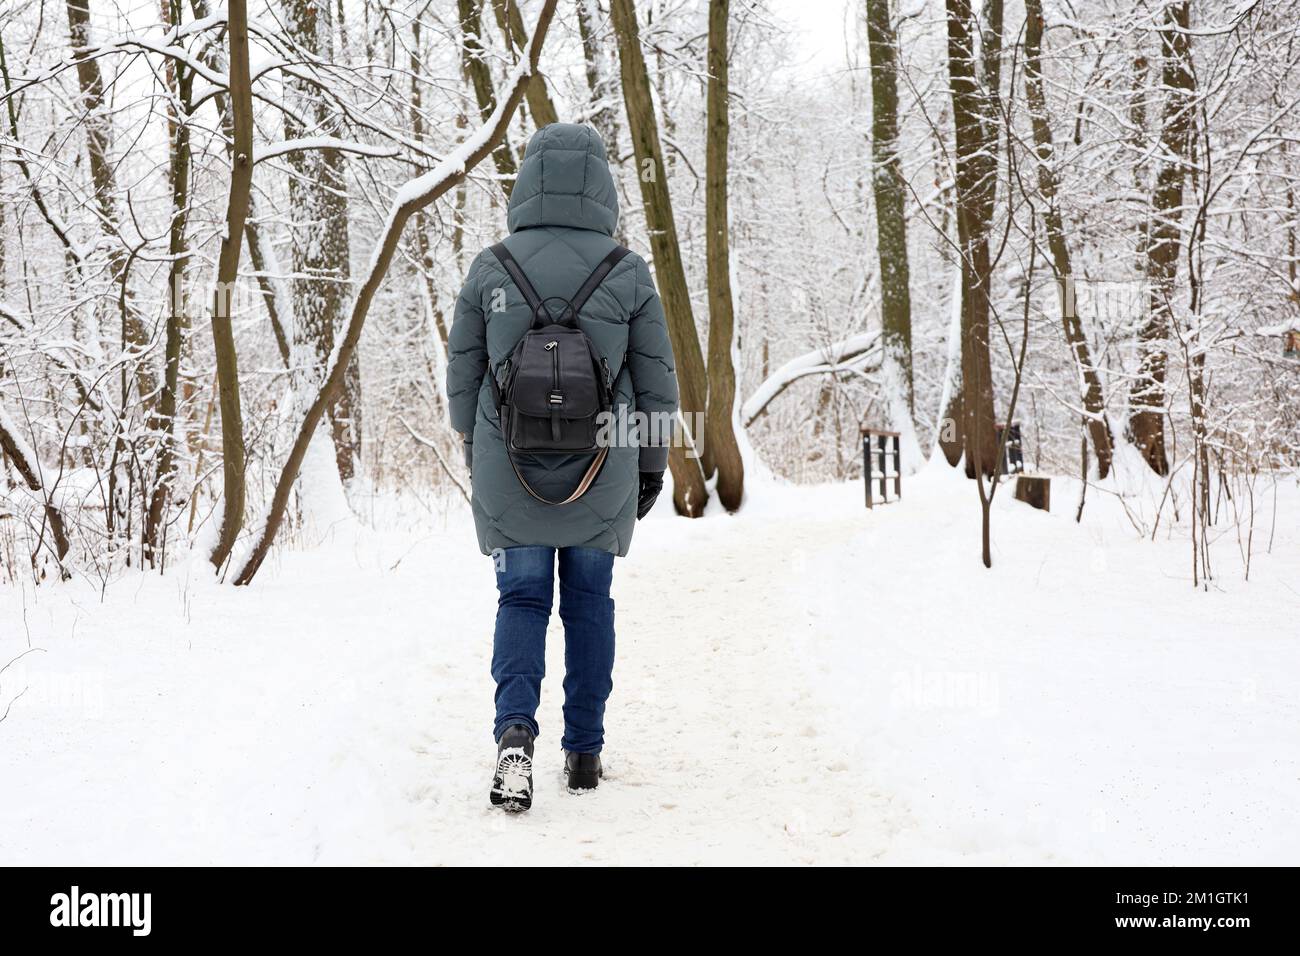 Woman wearing down jacket with backpack walking in winter park. Enjoying the nature, scenic view with trees covered with snow Stock Photo